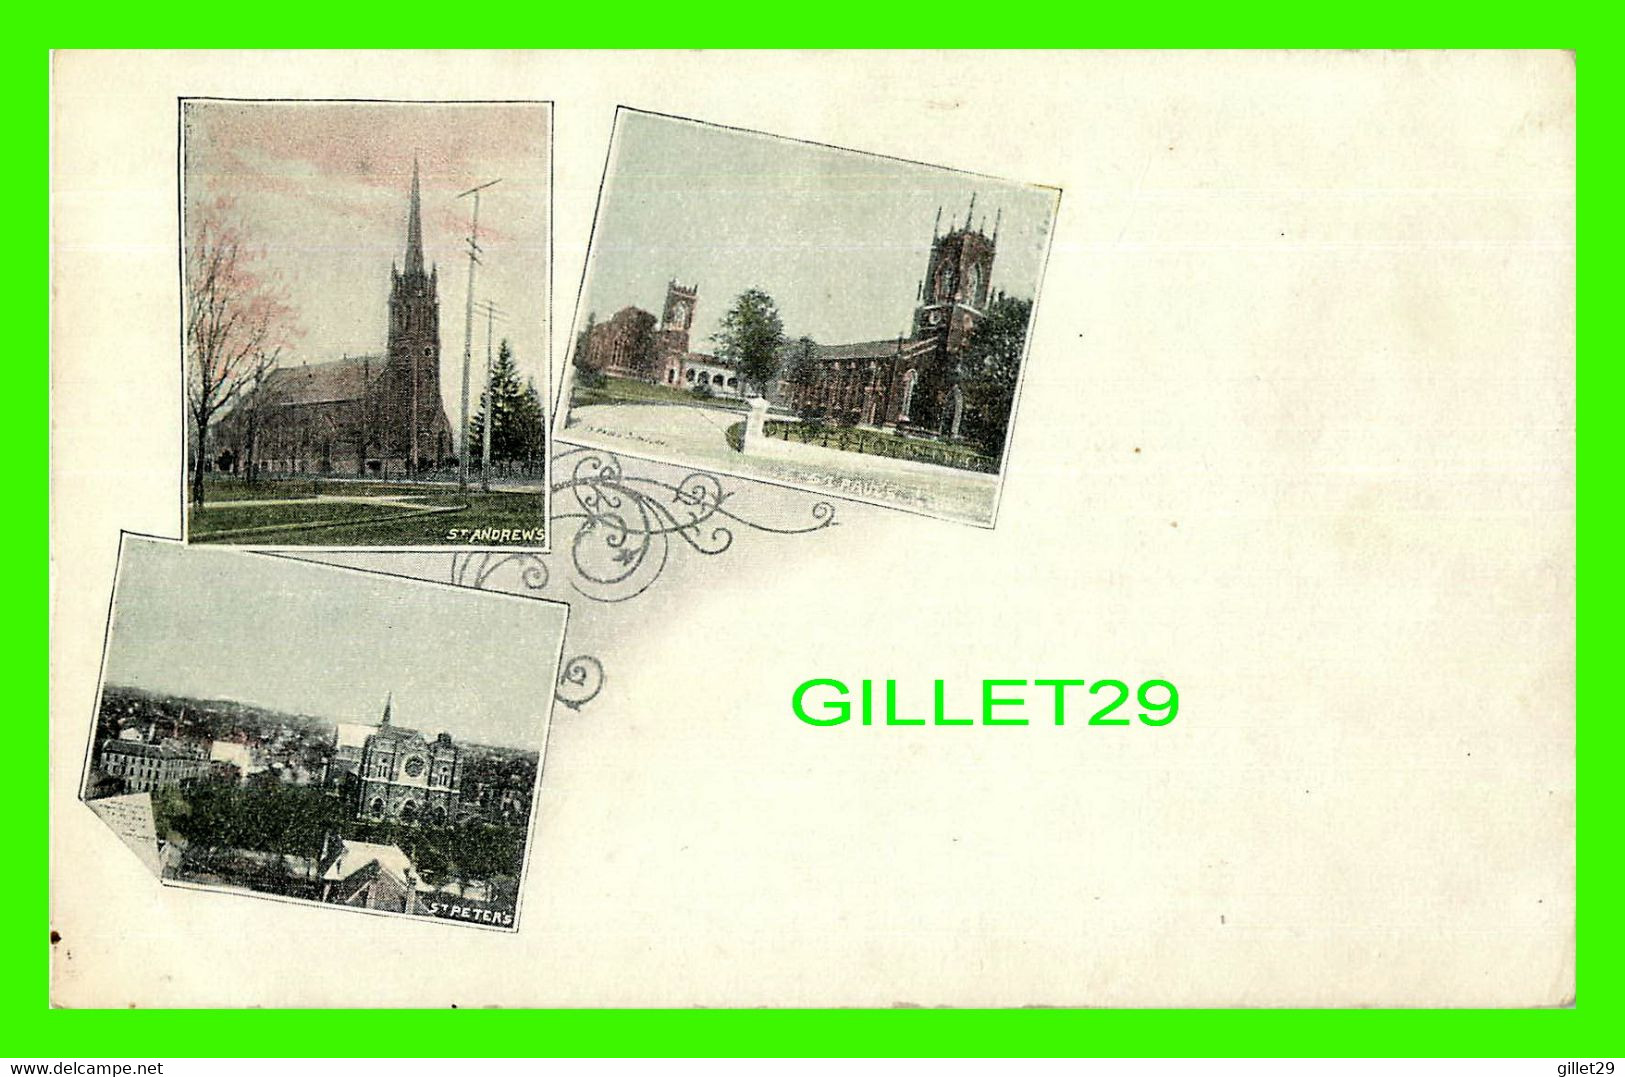 LONDON, ONTARIO - PICTURE OF 3 CHURCHES - UNDIVIDED BACK - CANADAIN POSTAL CARD - - Londen